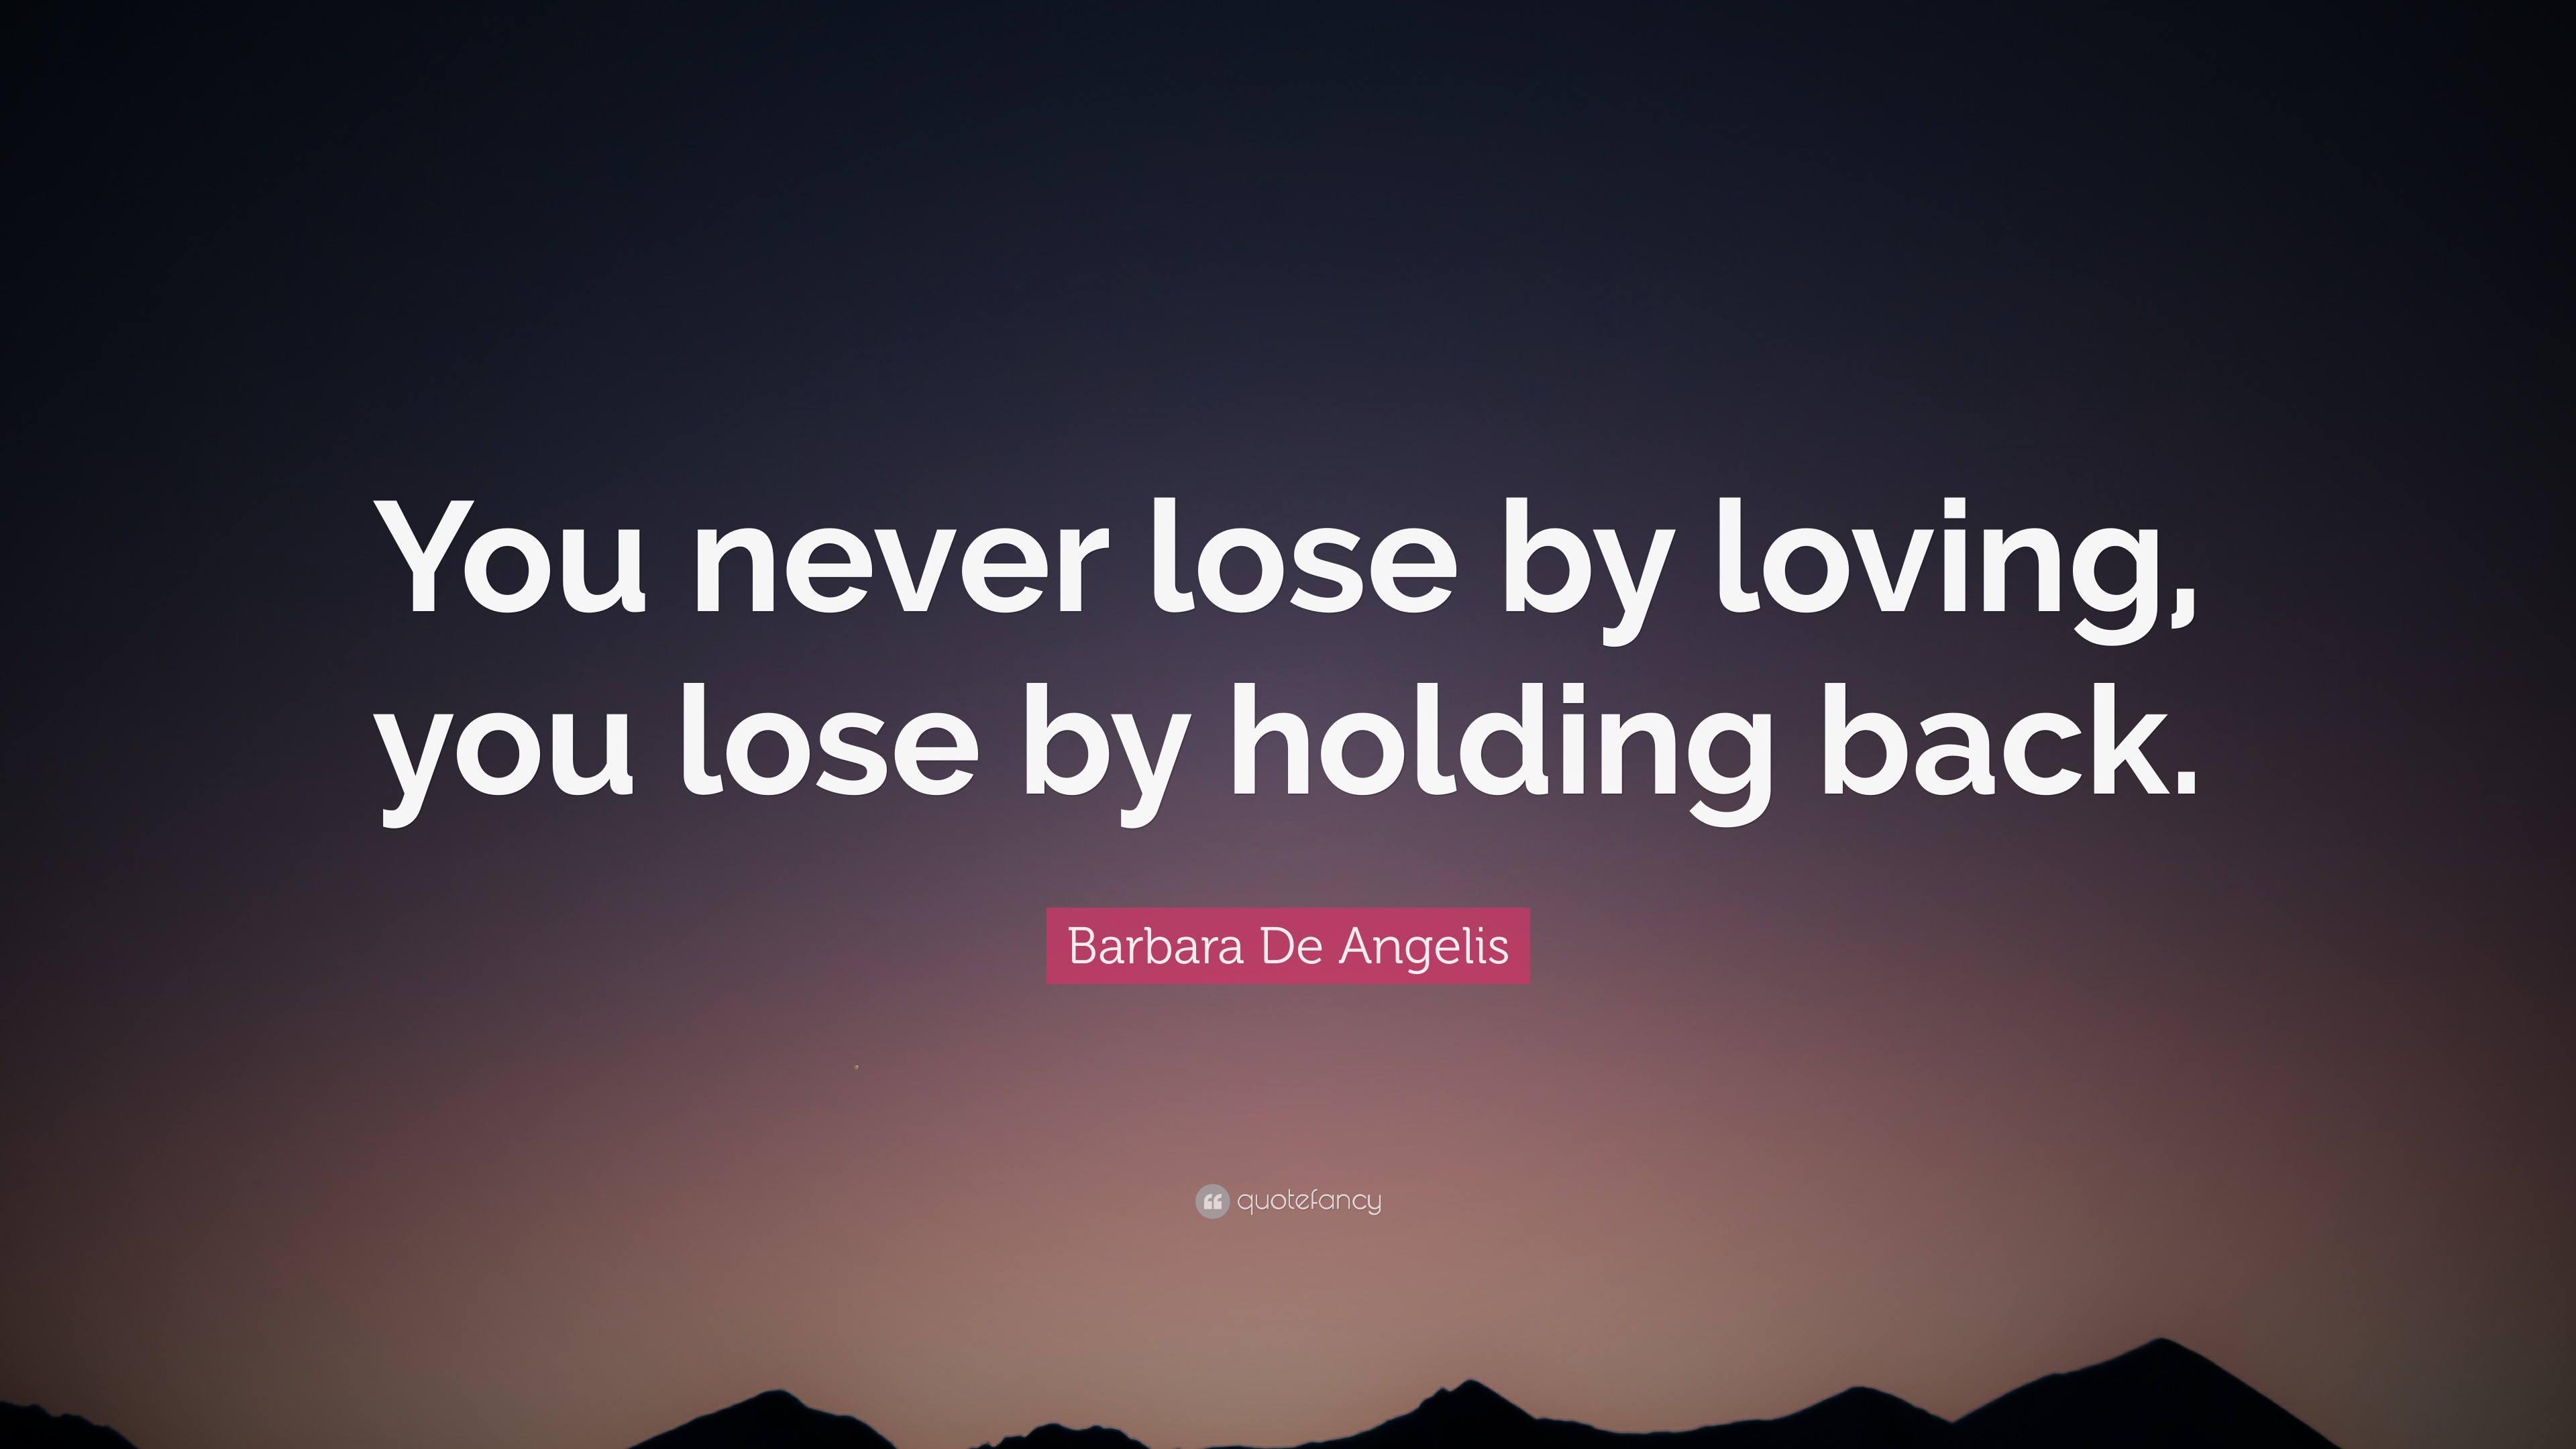 Barbara De Angelis Quote You never lose by loving you lose by holding